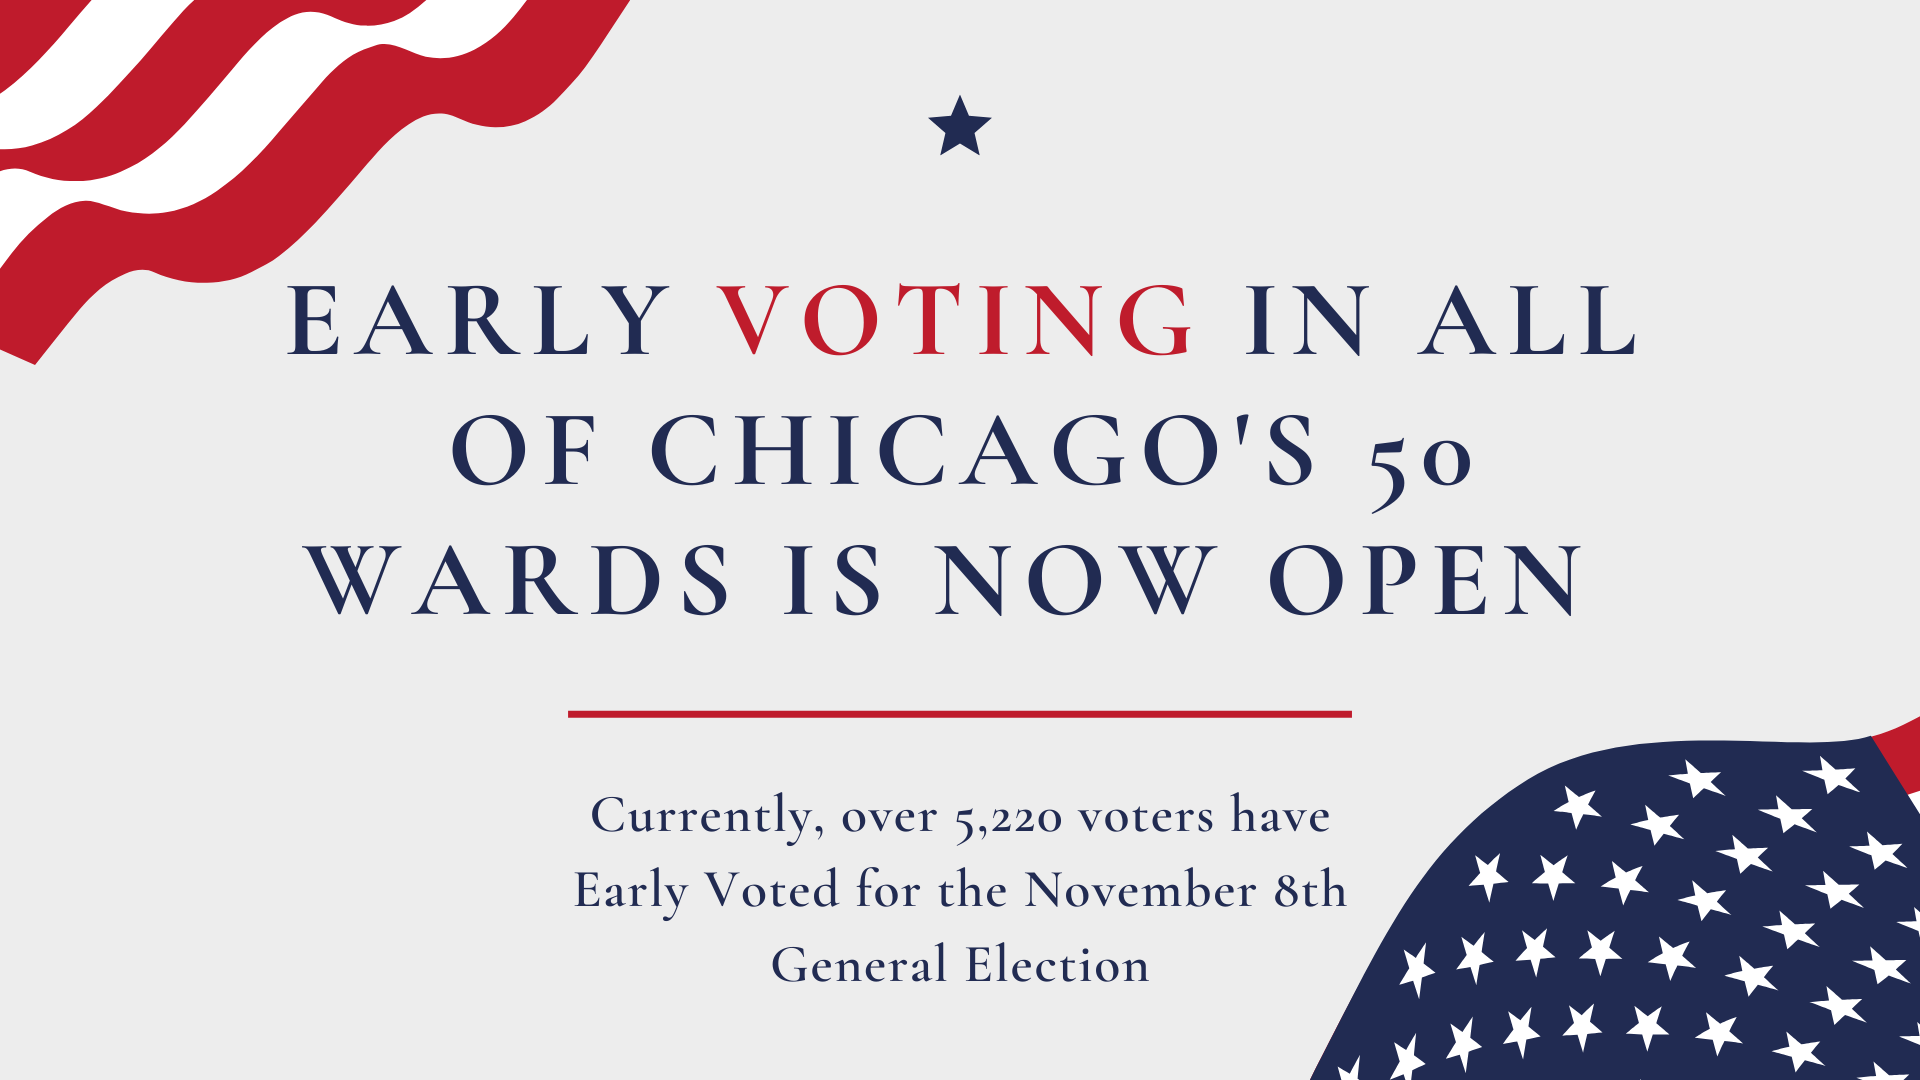 Early Voting For November 8th General Election  Is Now Open in All of Chicago’s 50 Wards